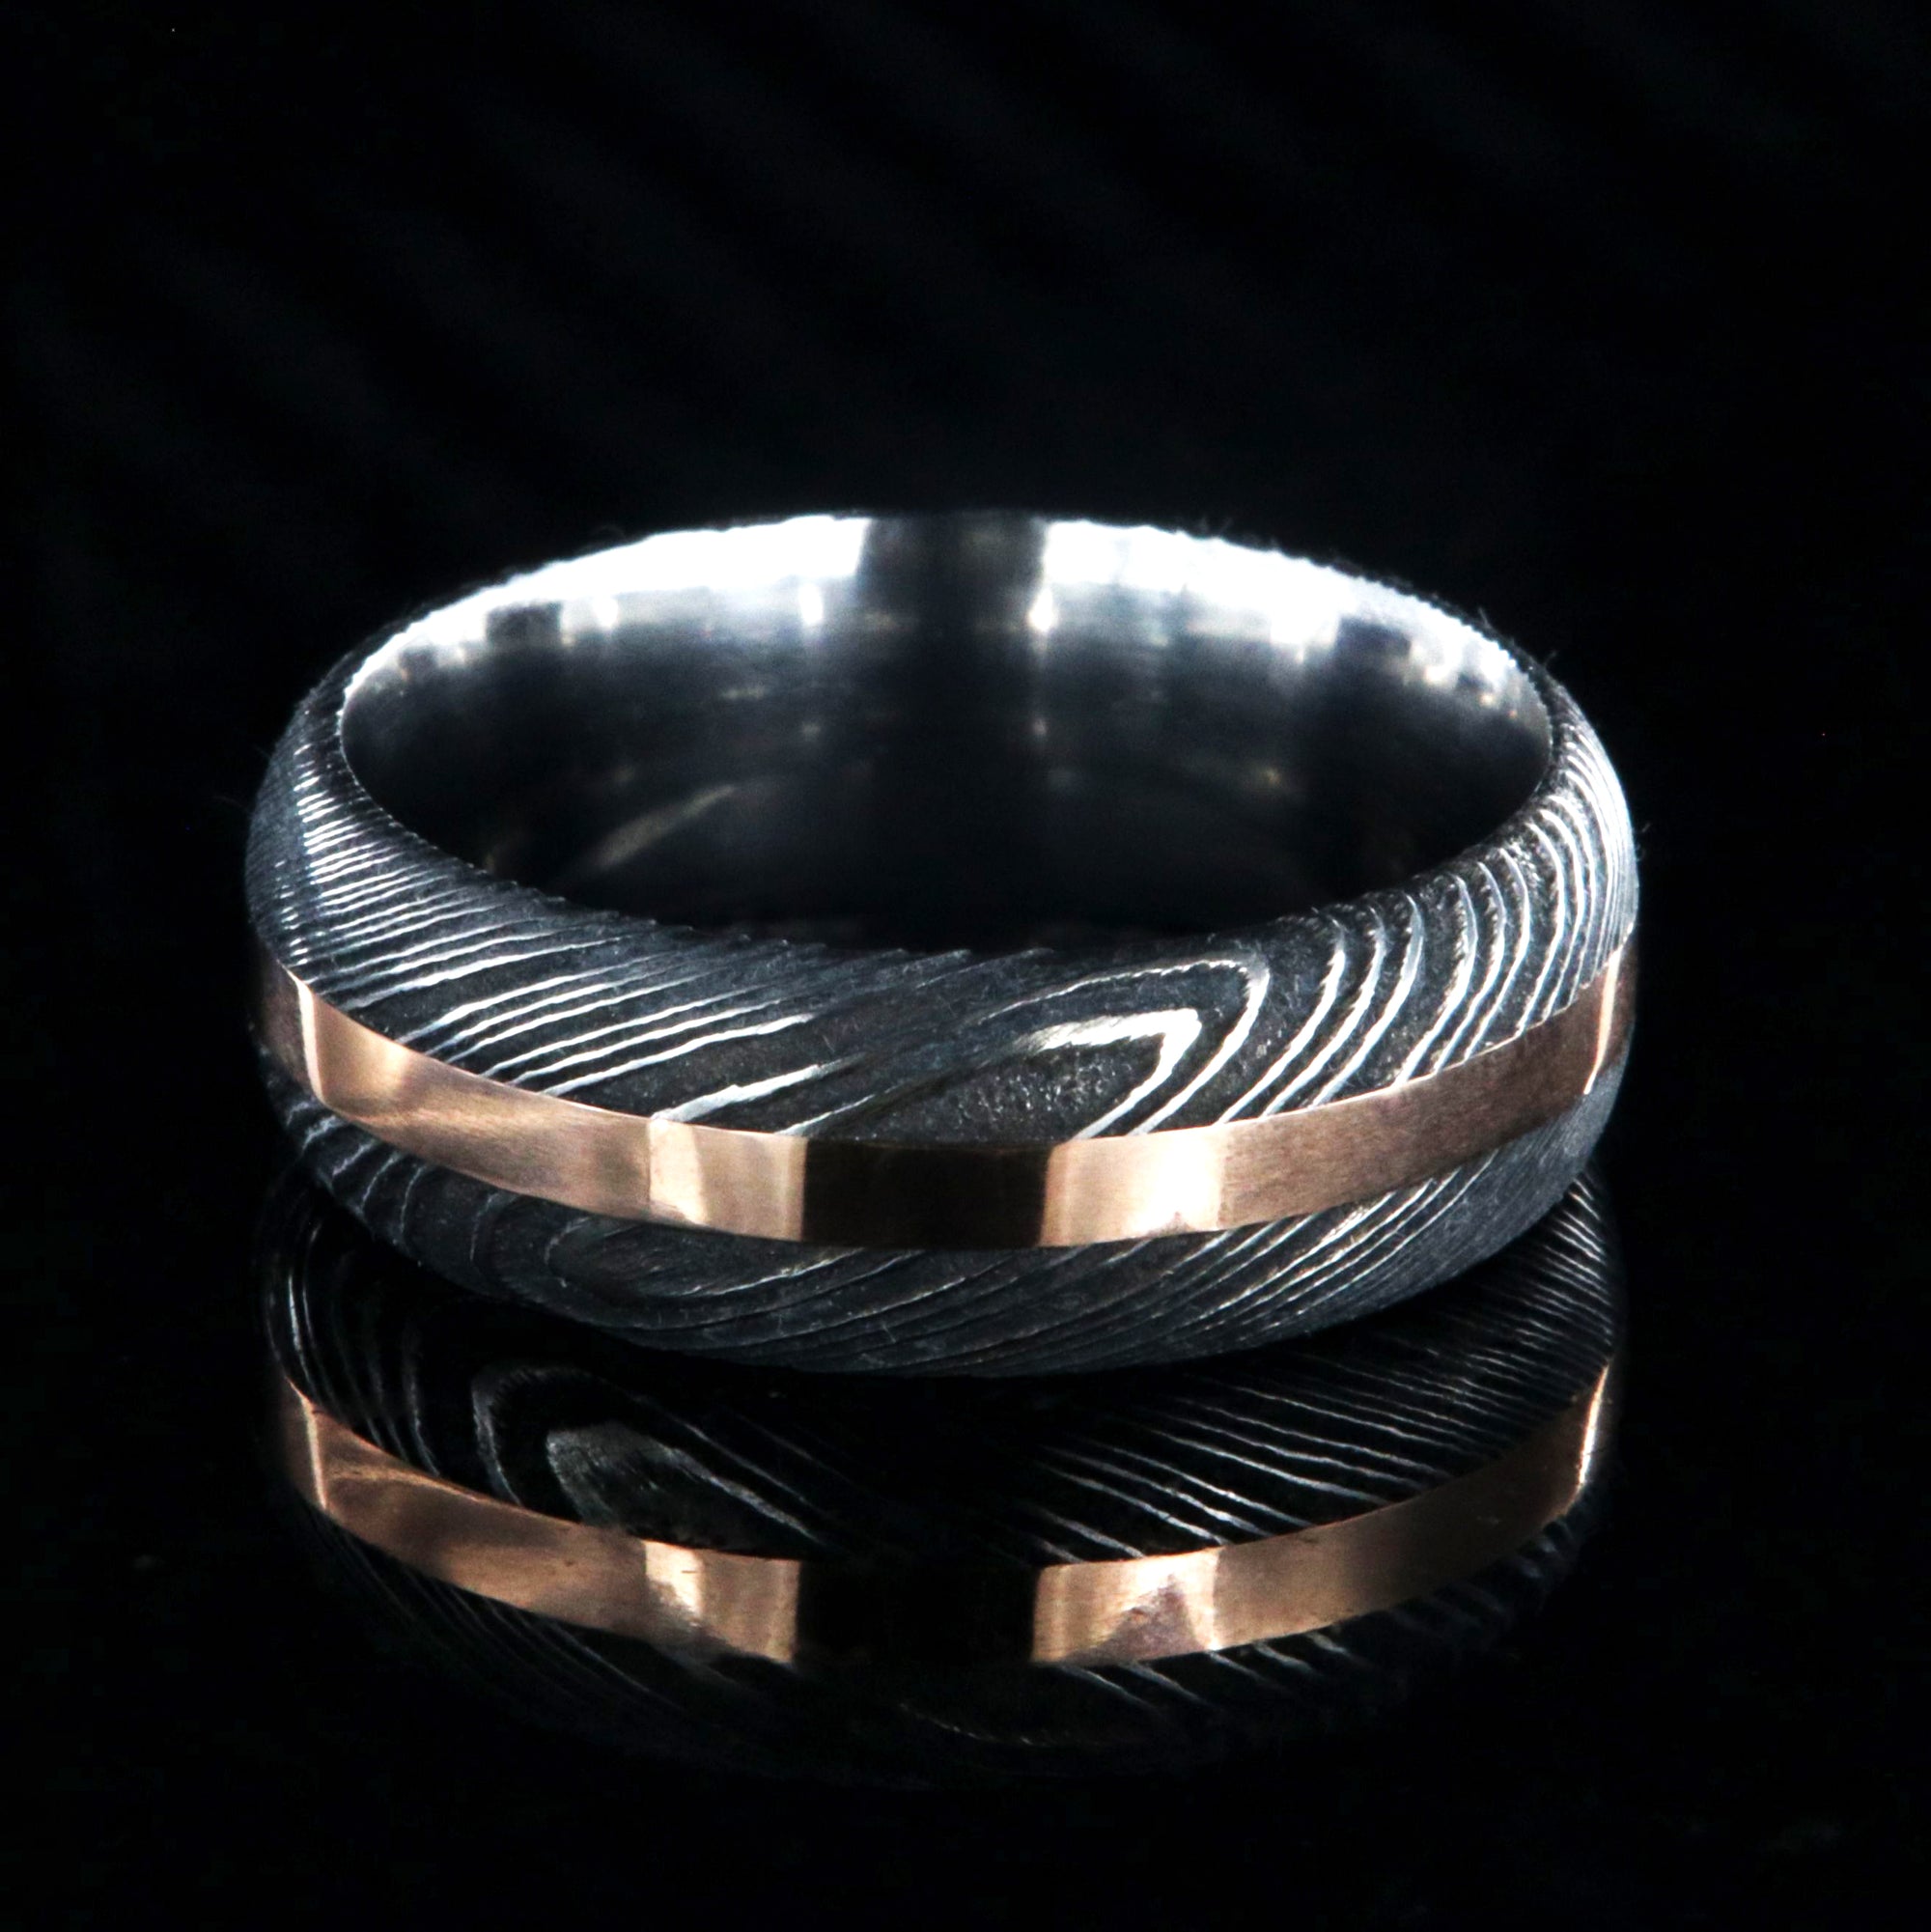 8mm wide black Damascus steel wedding band with a centered rose gold inlay and rounded profile